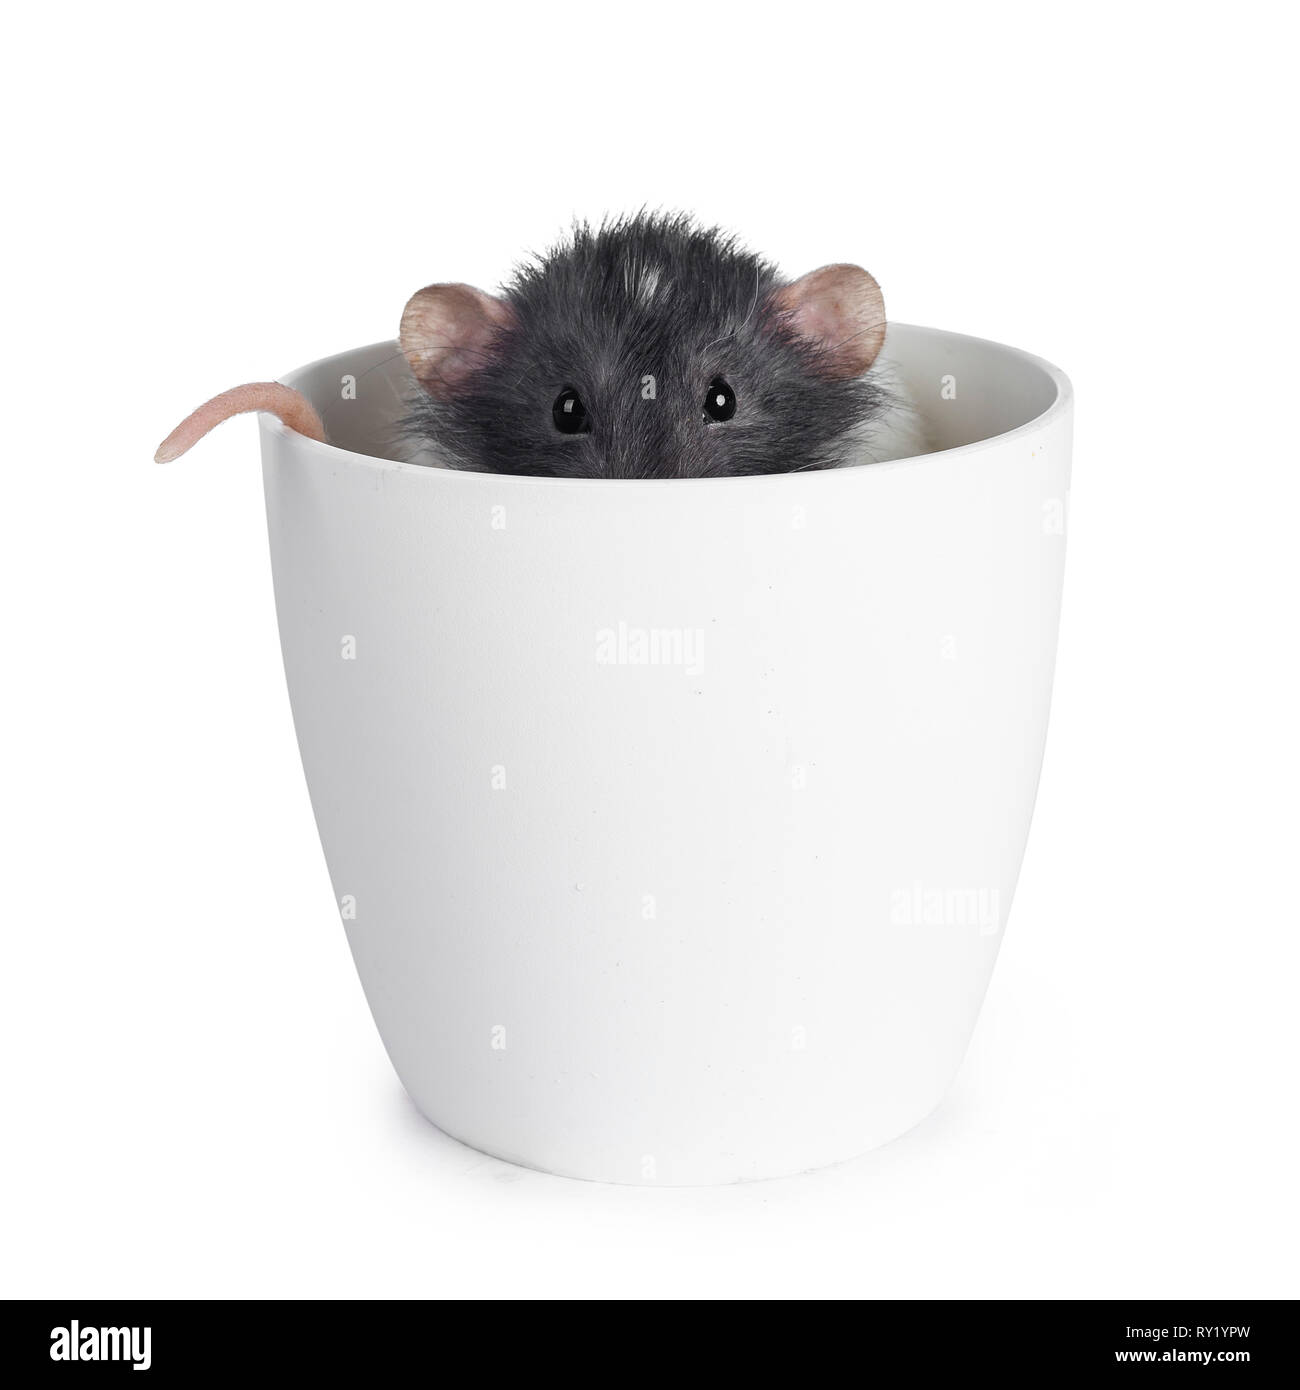 Cute dumbo rat, sitting / hiding in an empty flower pot. Peeping just over the edge wth head and tail. Looking straight ahead at lens with shiny eyes. Stock Photo